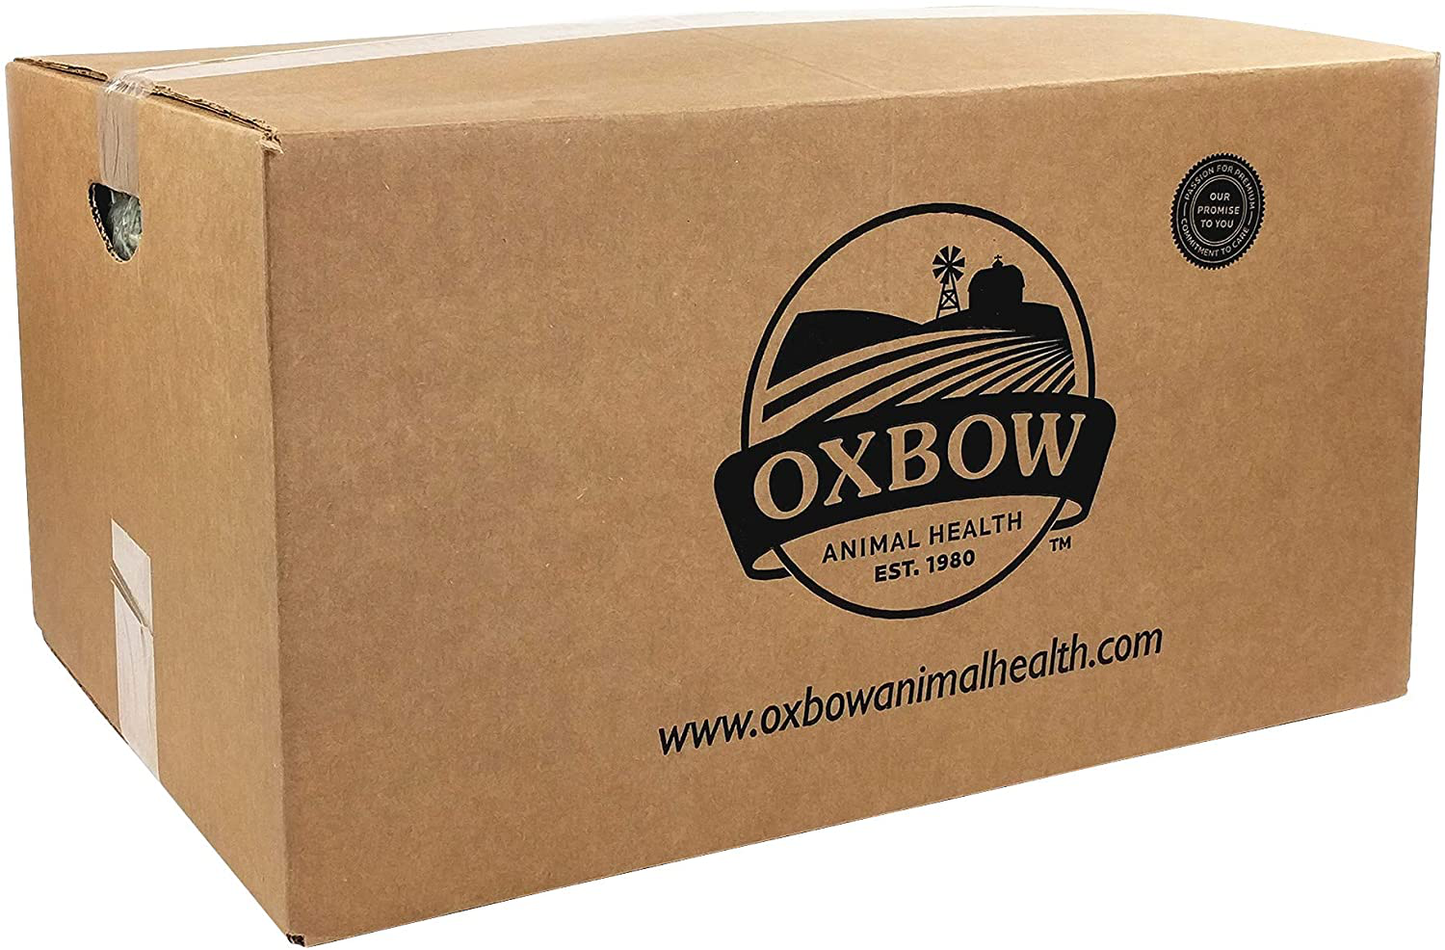 Oxbow Animal Health Orchard Grass Hay - All Natural Grass Hay for Chinchillas, Rabbits, Guinea Pigs, Hamsters & Gerbils Bulk Size